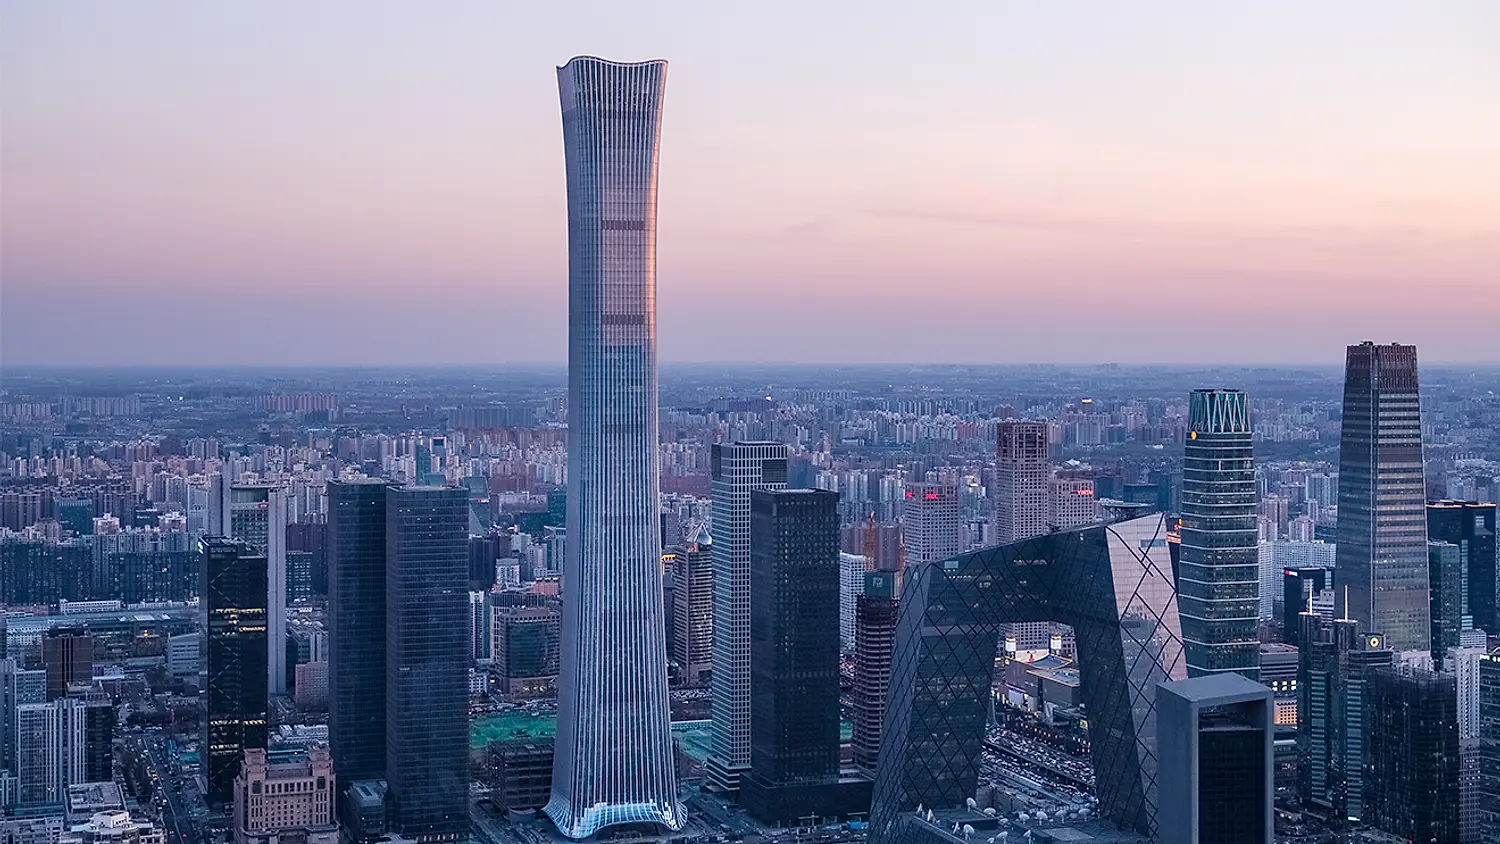 CITIC Tower Becomes Beijing's Tallest Building